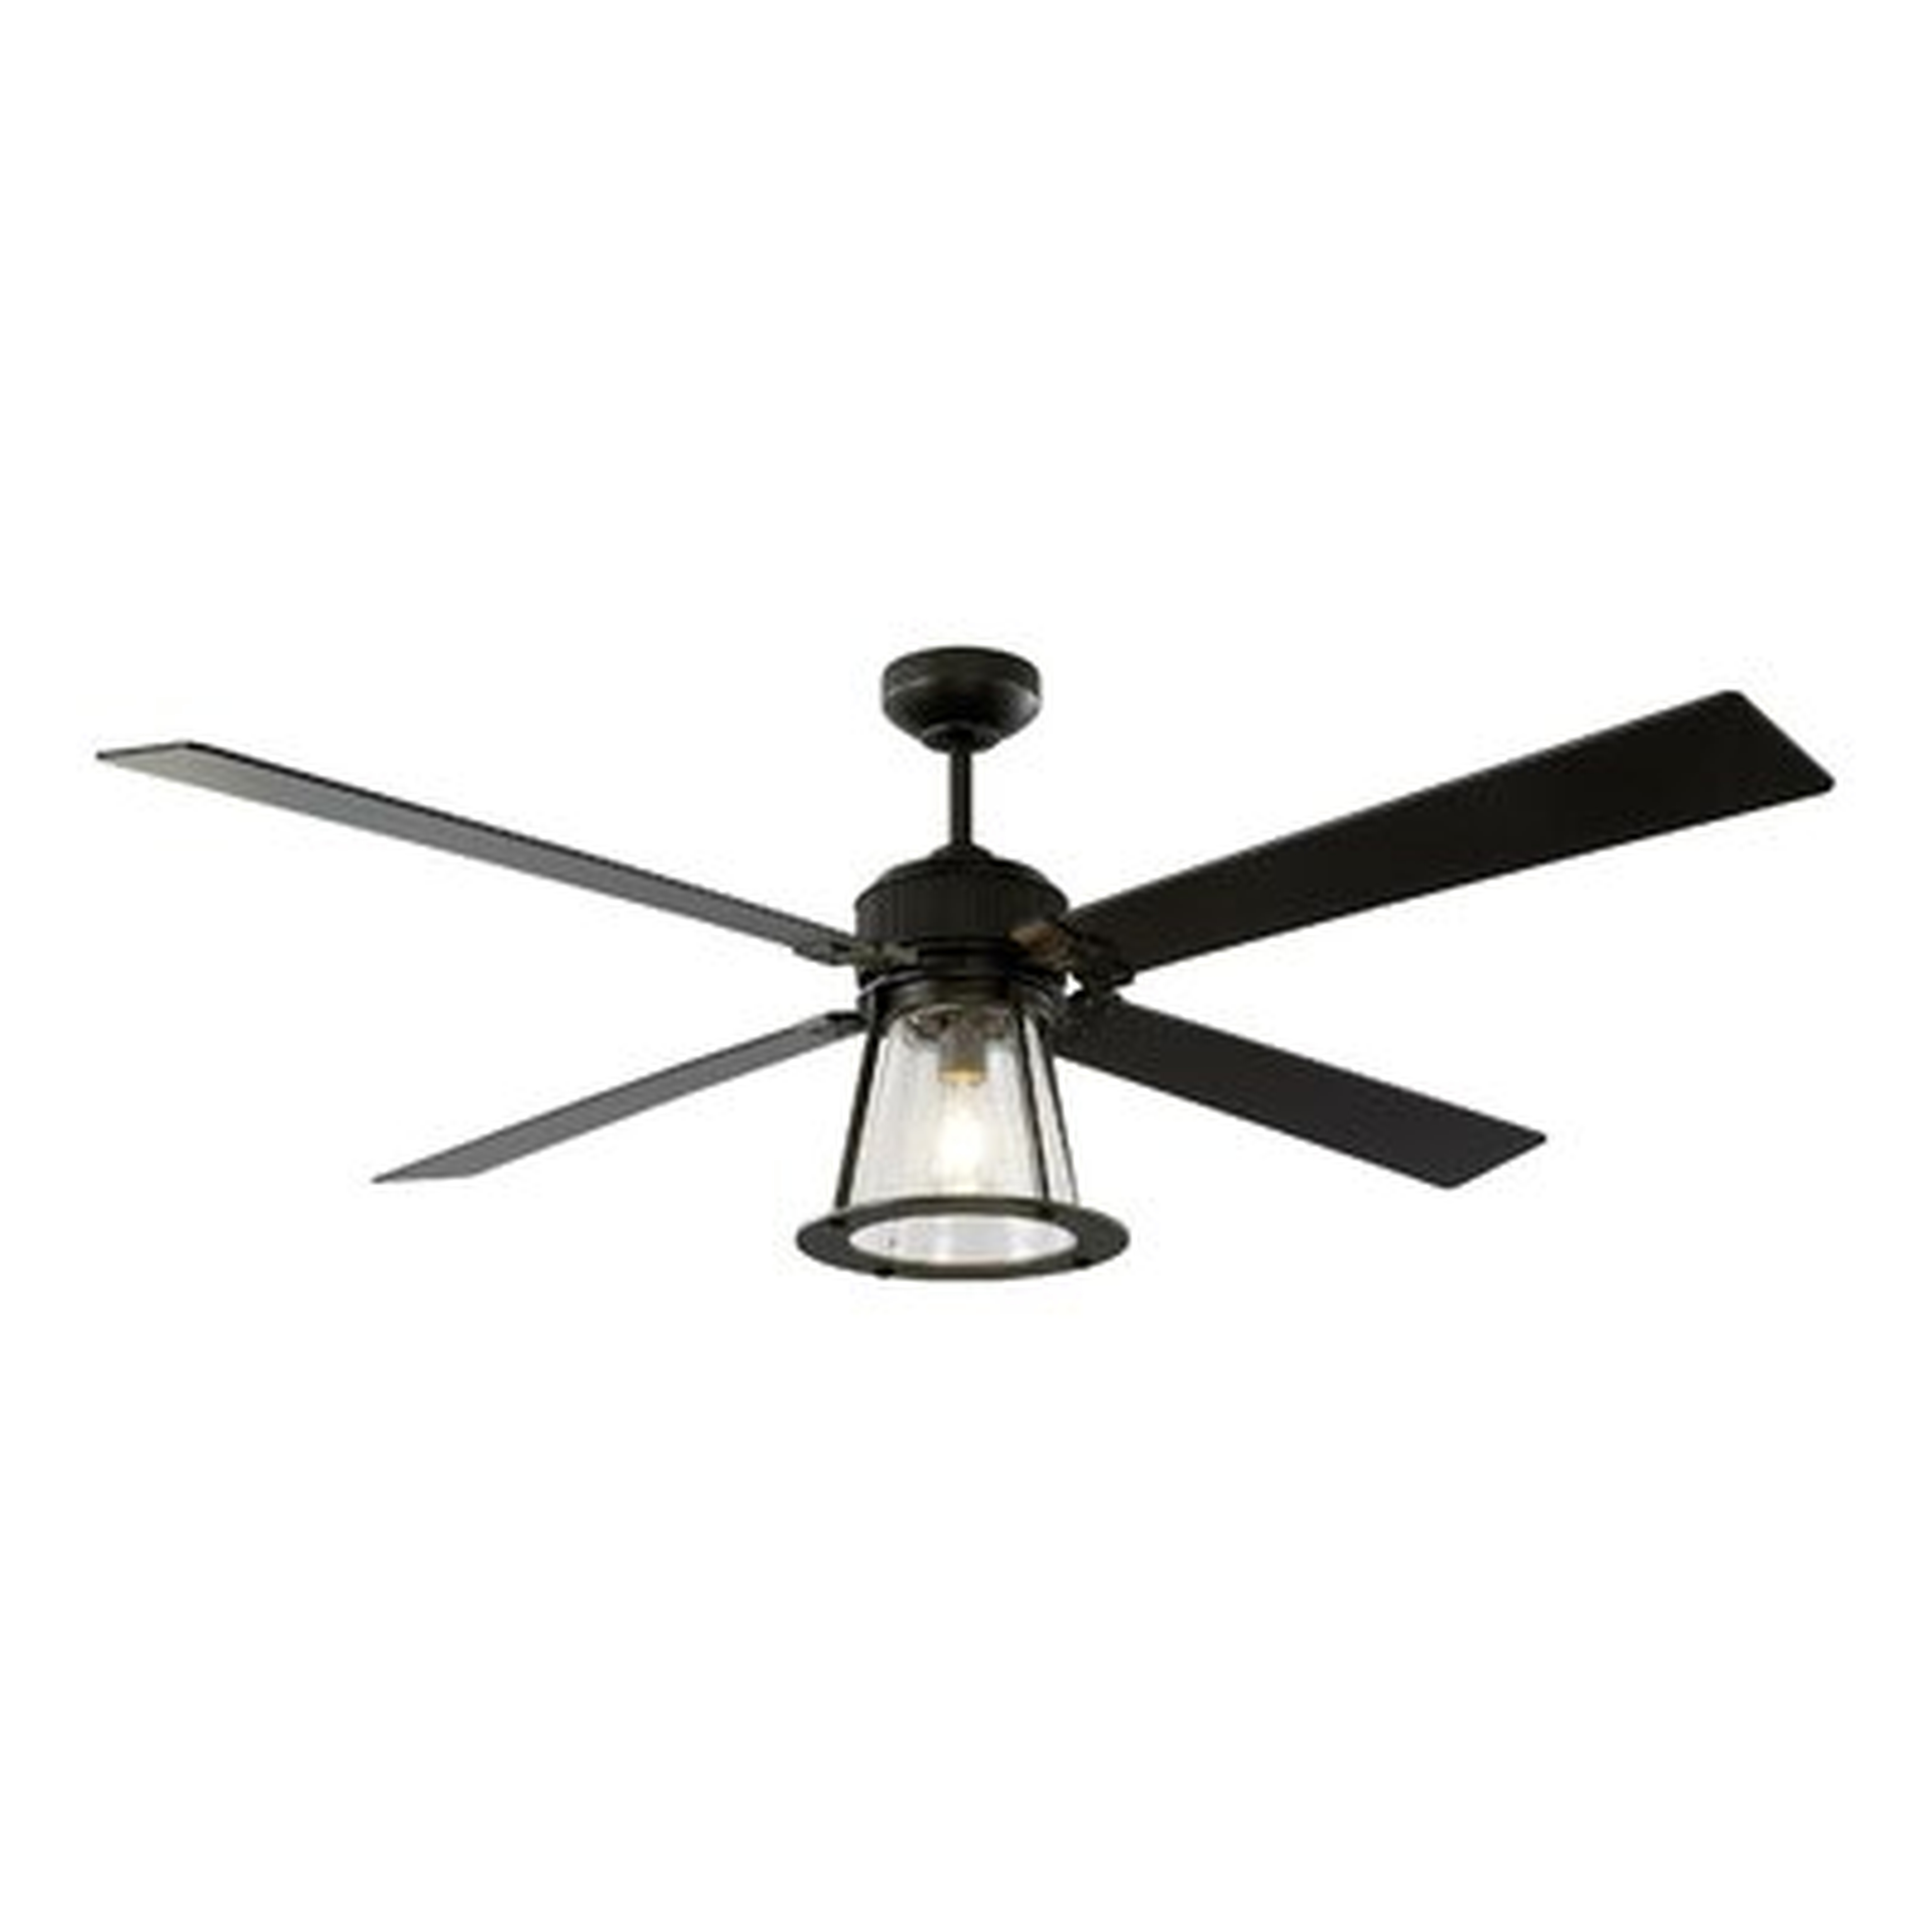 Carver 60" 4 - Blade Standard Ceiling Fan with Remote Control and Light Kit Included - Birch Lane